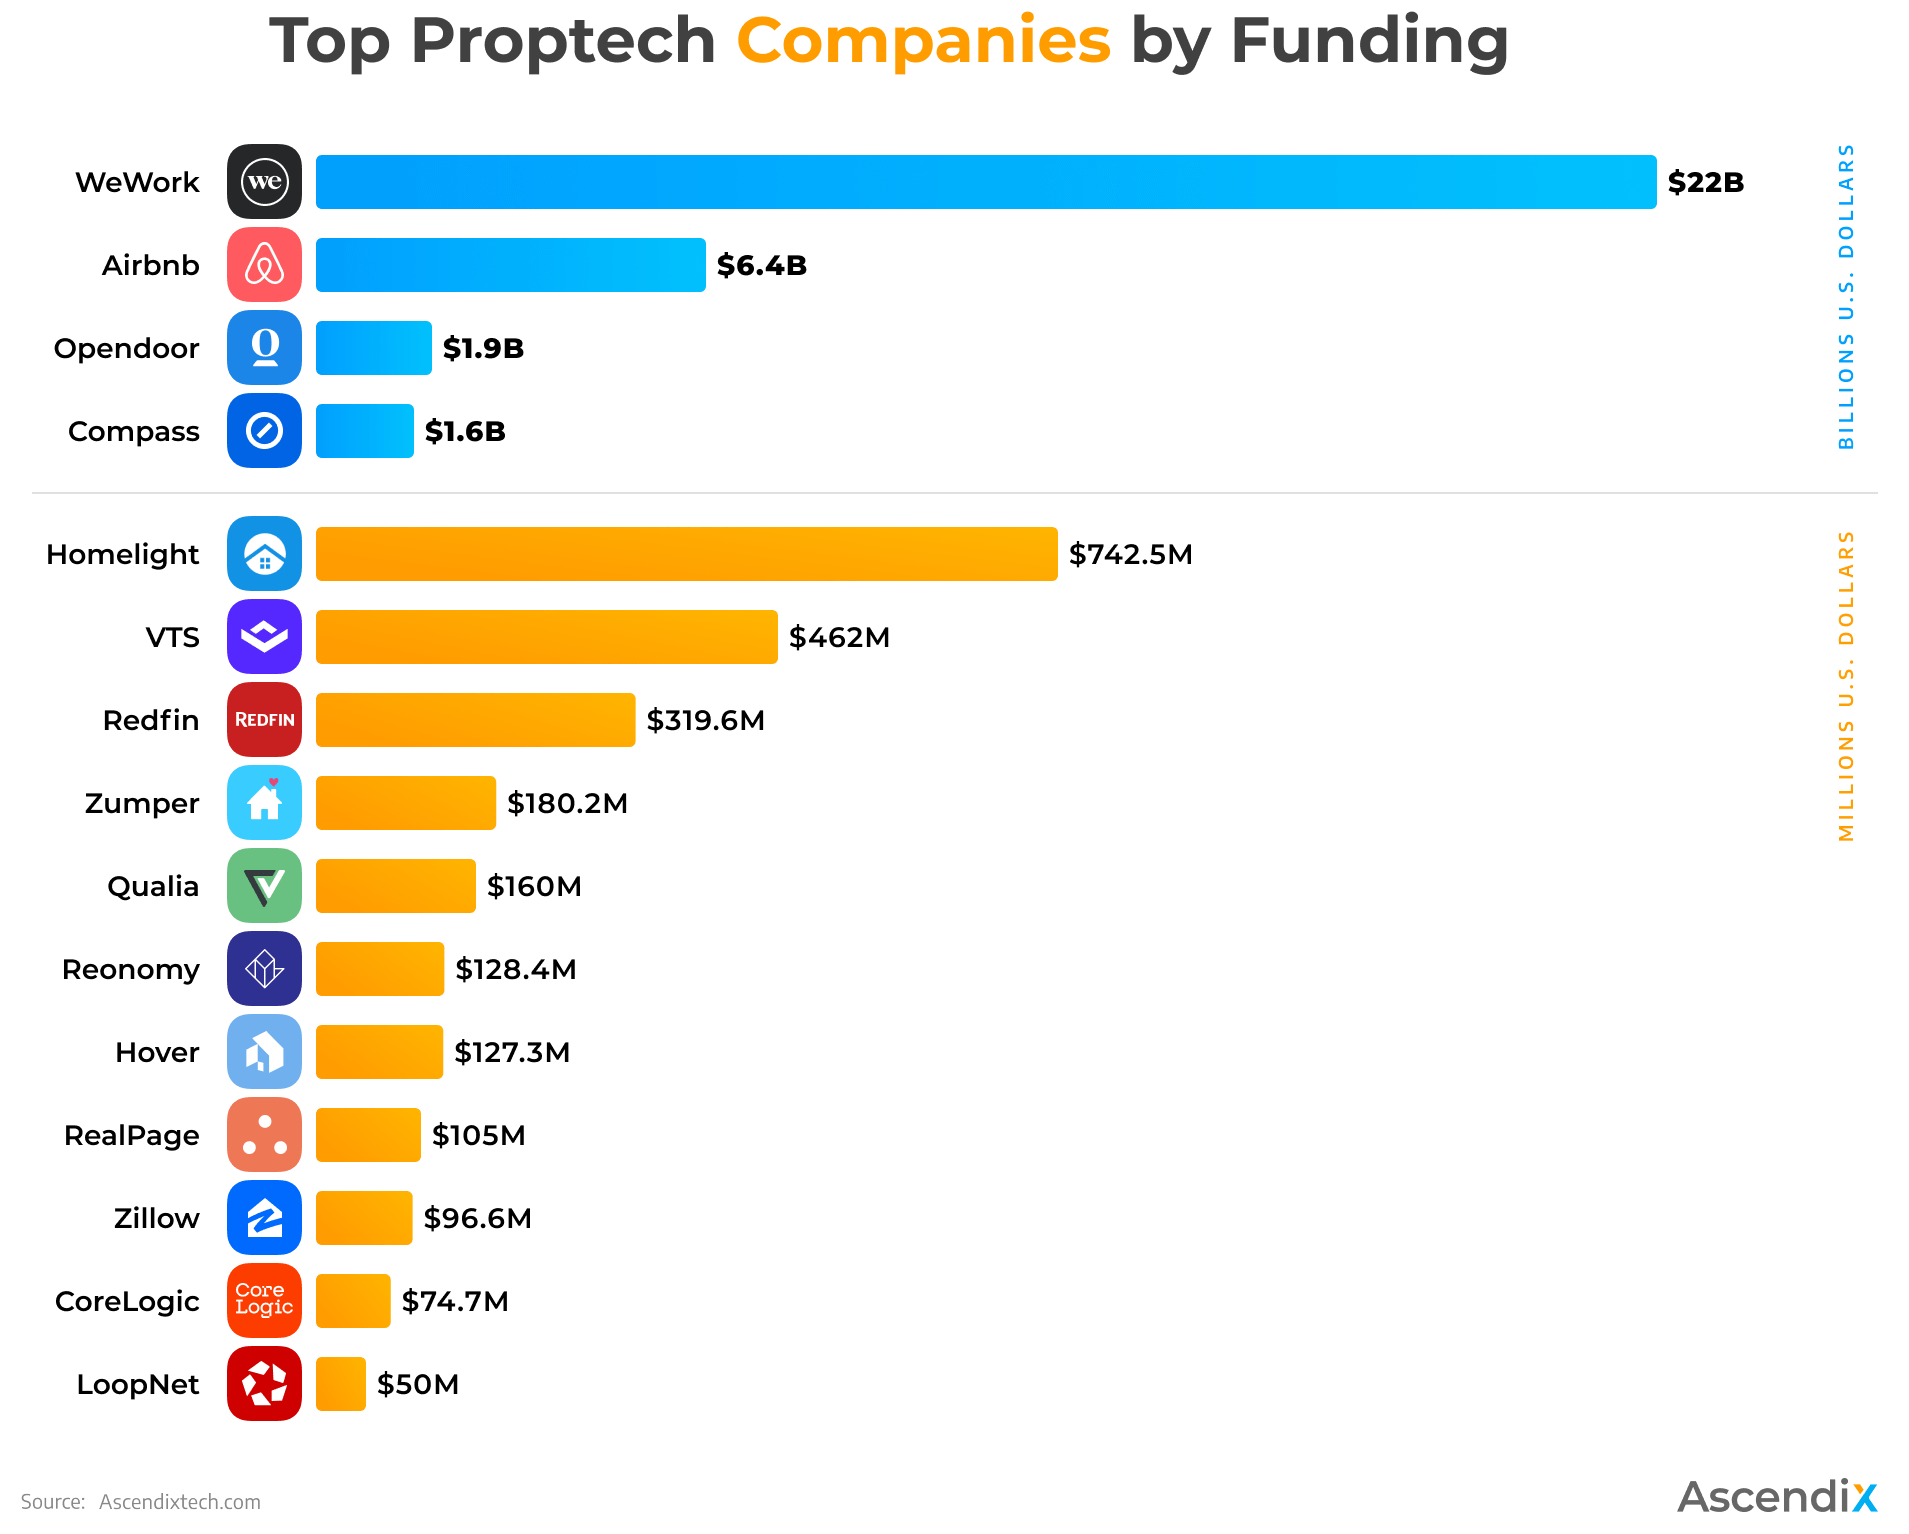 Top Proptech Companies by Funding